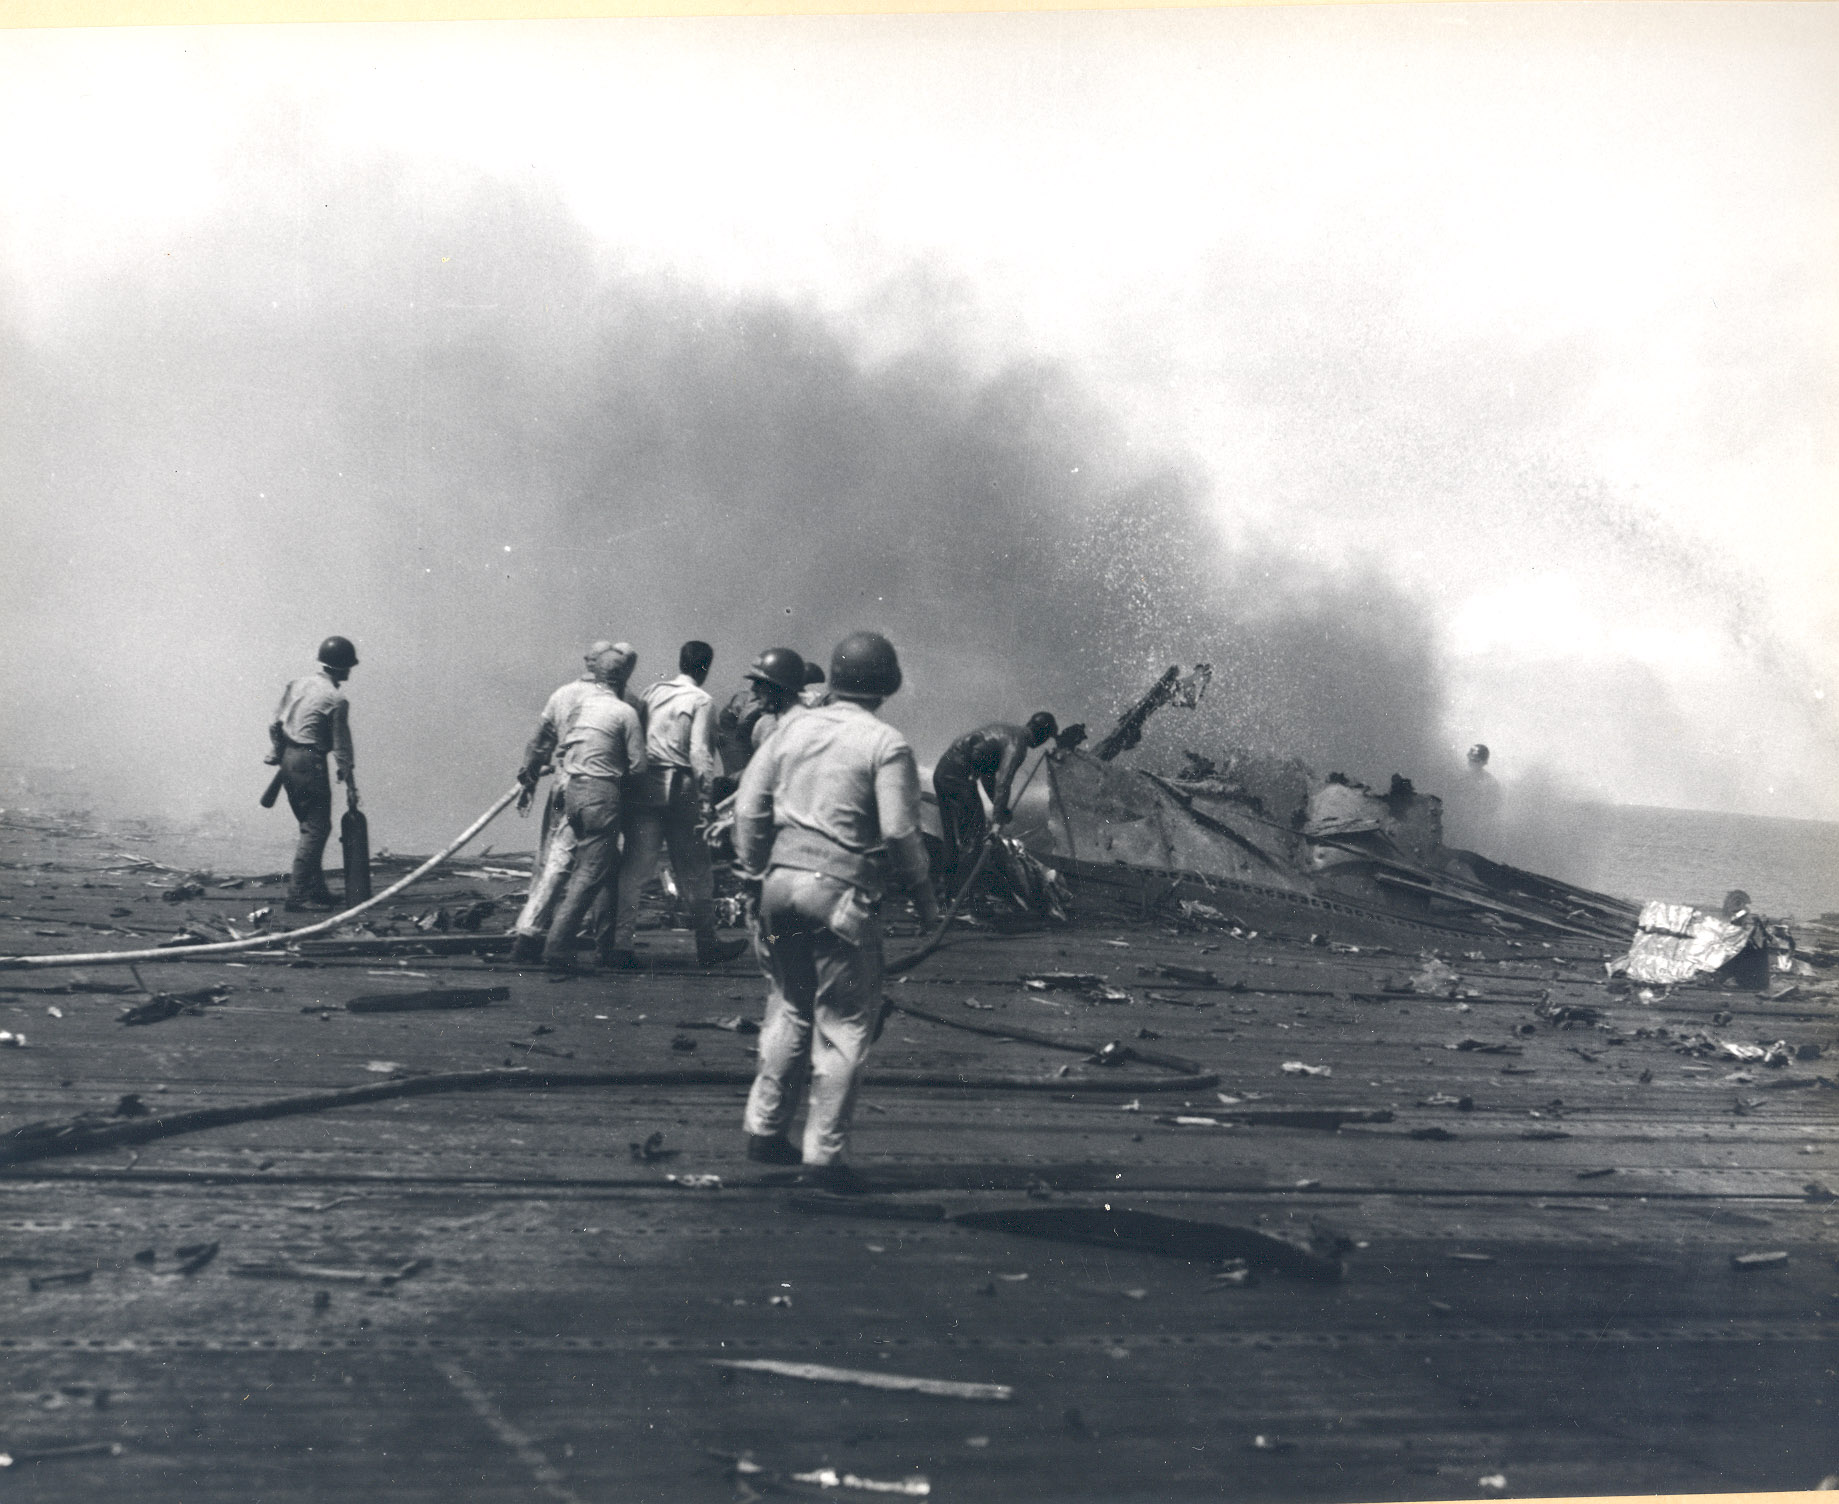 Damage control parties trying to bring fires under control on the flight deck of USS Intrepid following the crash of a Japanese special attack aircraft off the Philippines, 25 Nov 1944. Note the bulge in the deck